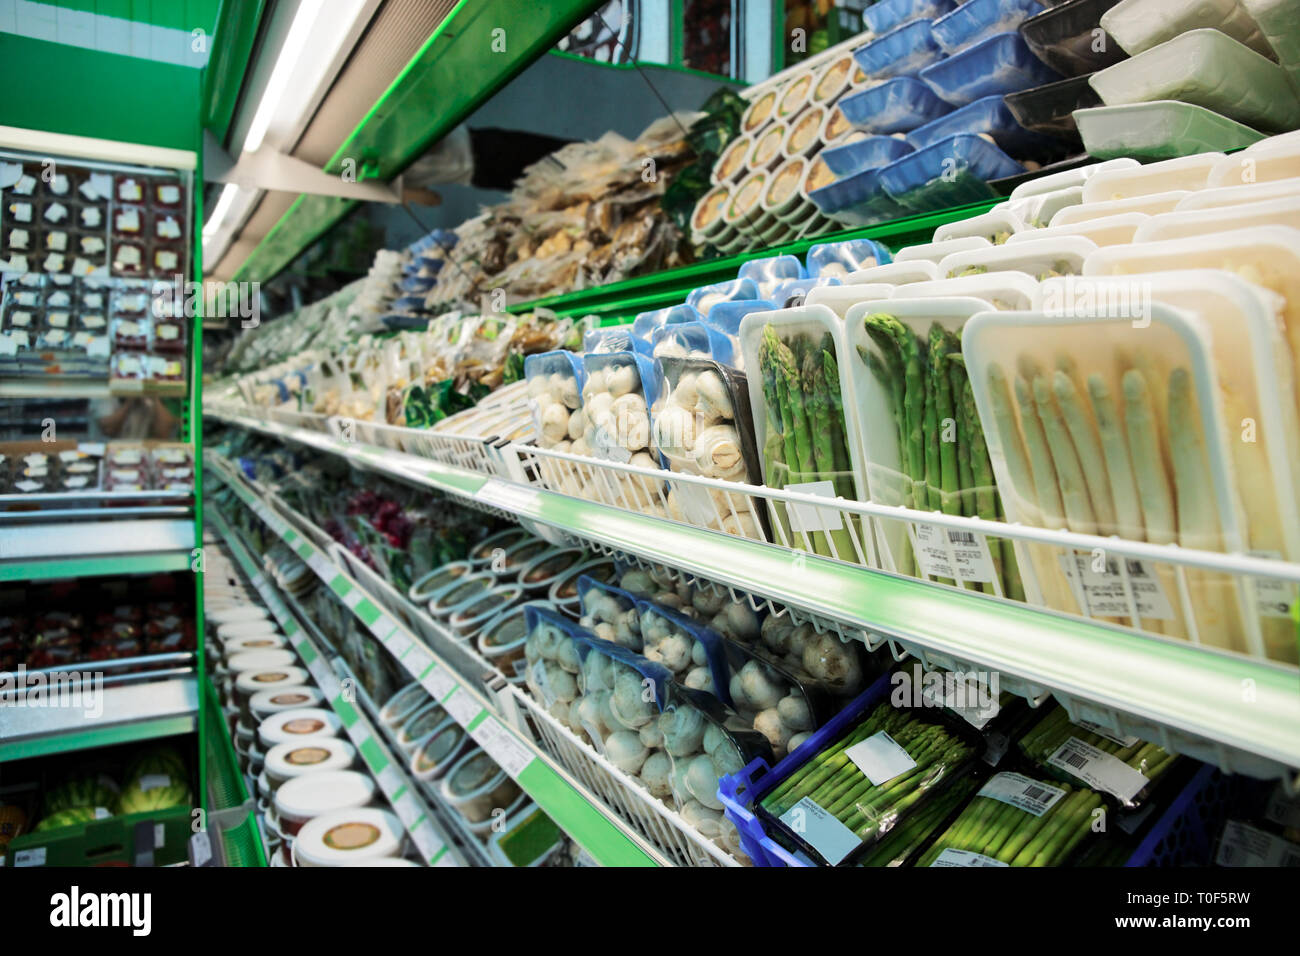 Shelf with groceries in supermarket, tm's removed Stock Photo